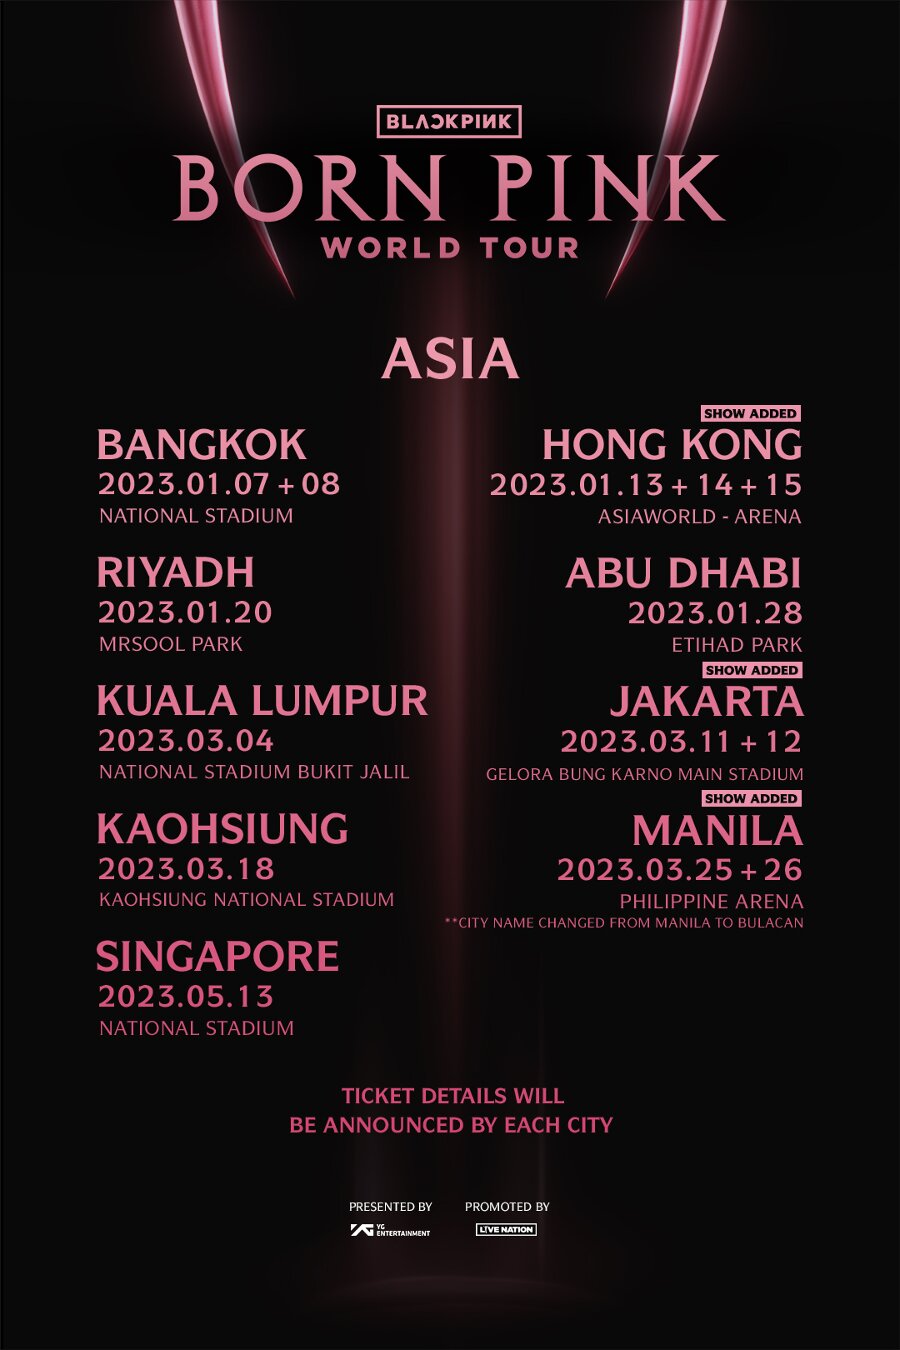 BLACKPINK Confirms Dates For the Asian Leg of 'Born Pink' World Tour